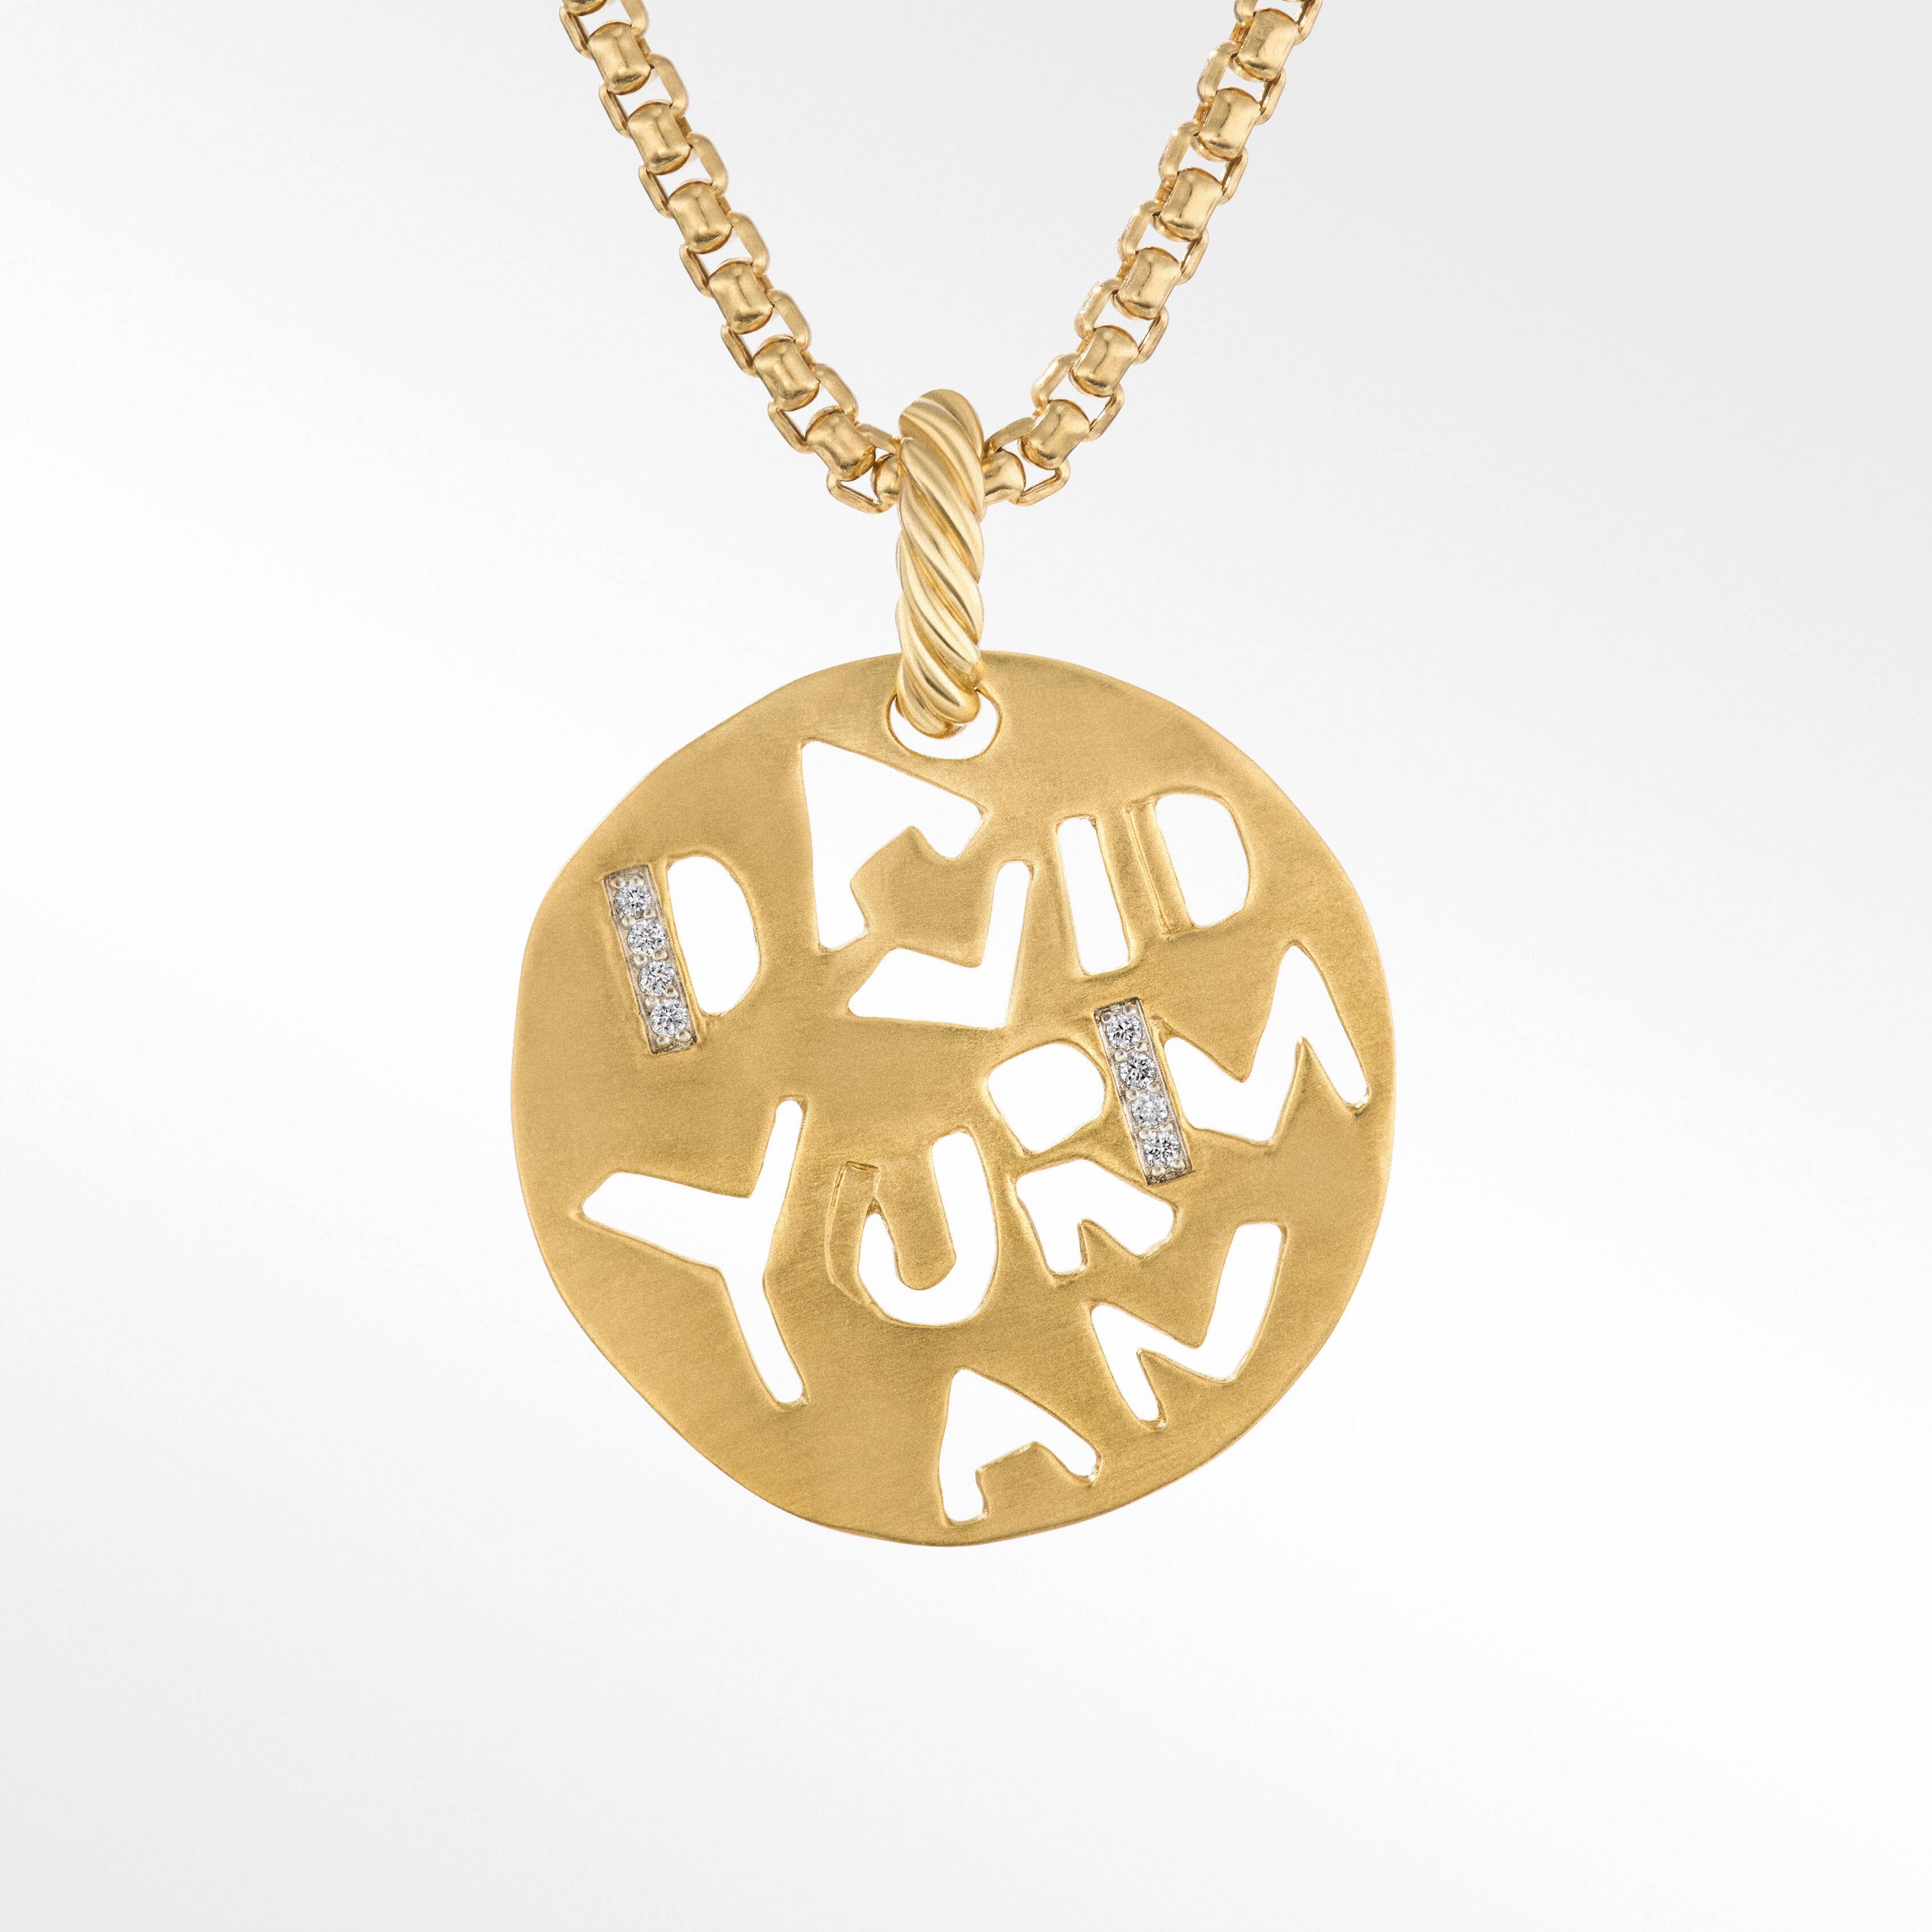 DY Elements® Graffiti Pendant in 18K Yellow Gold with Diamonds